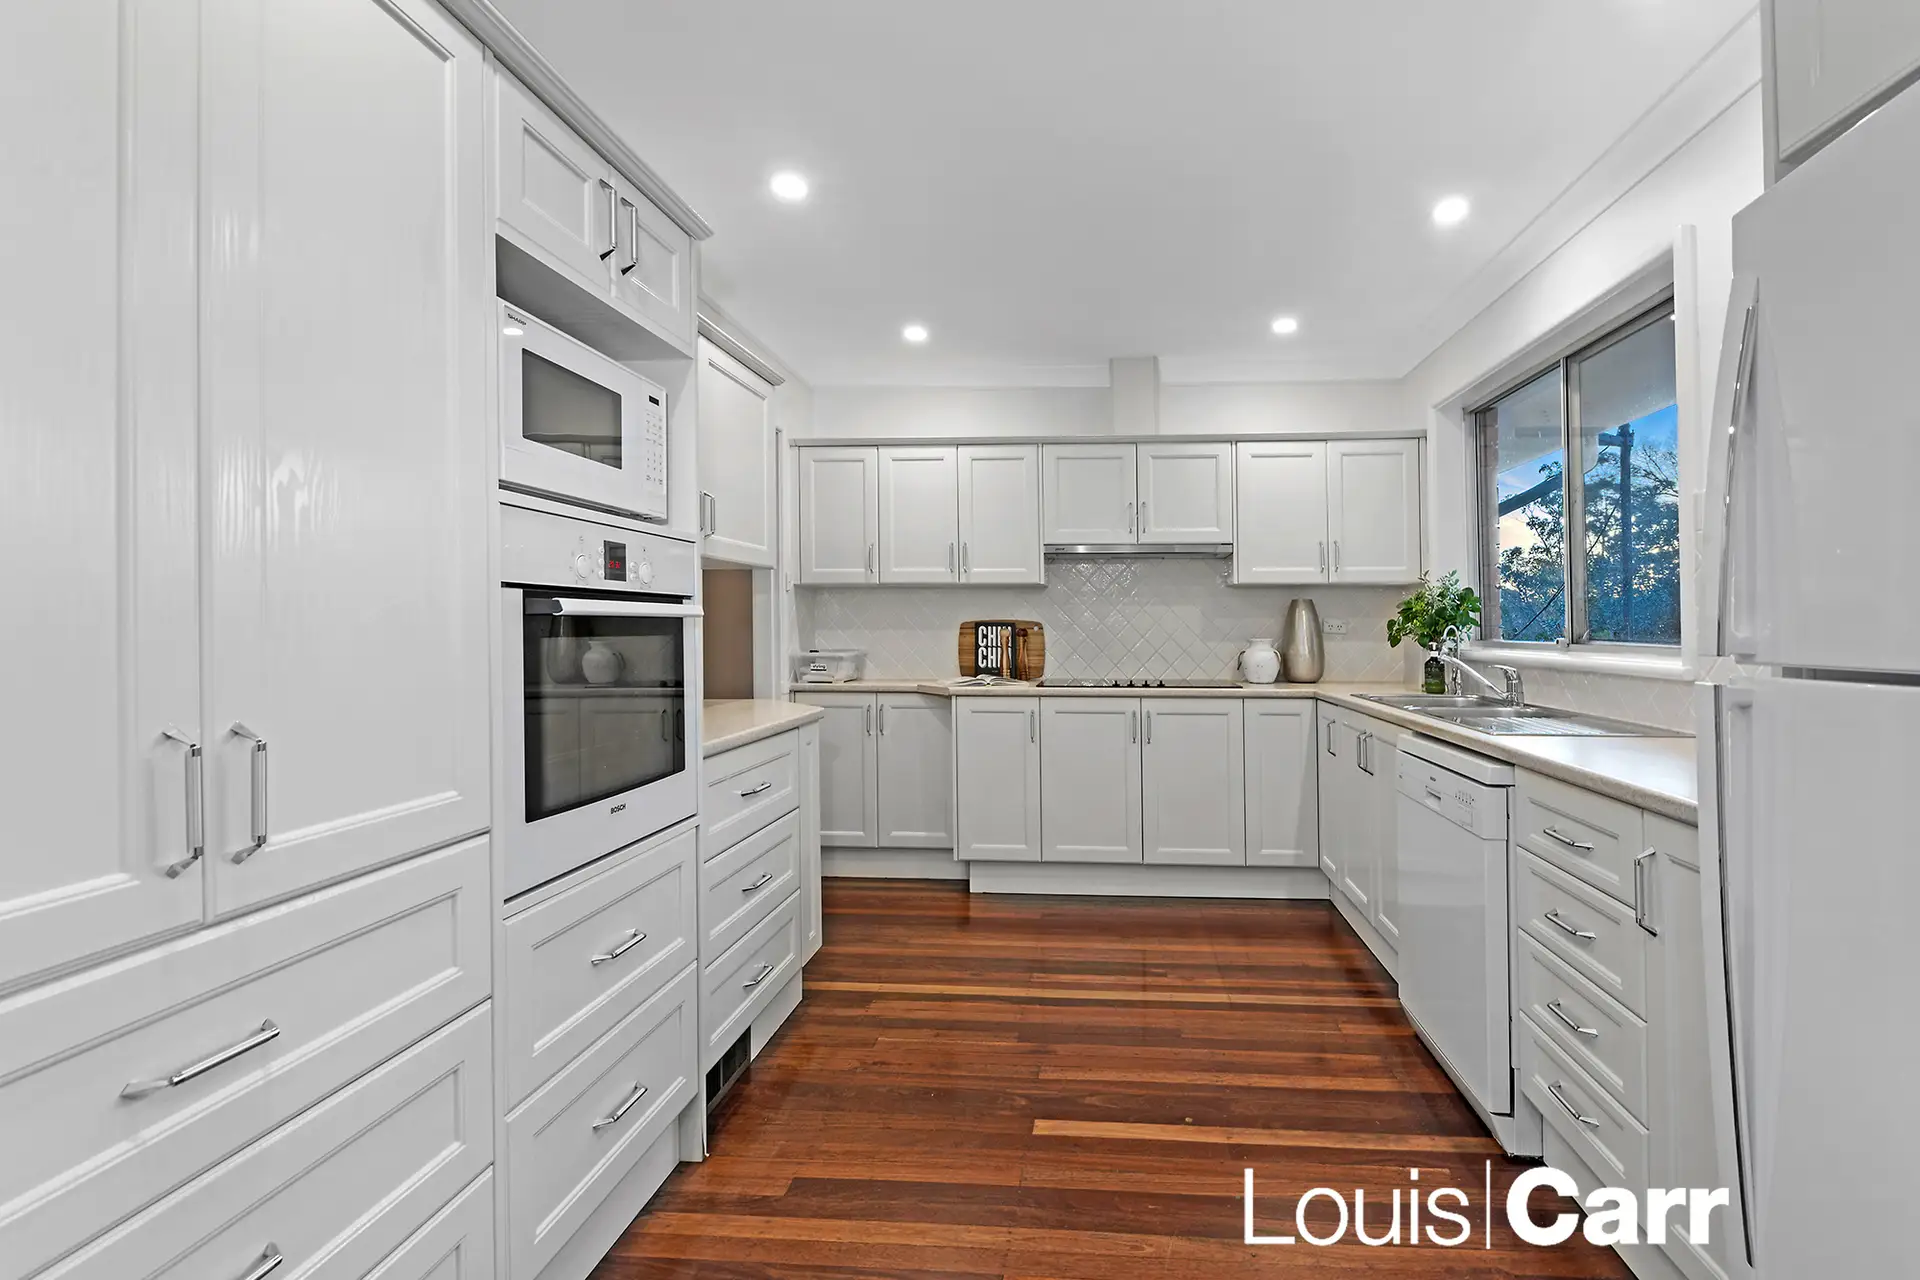 Photo #7: 4 Valda Street, West Pennant Hills - Sold by Louis Carr Real Estate